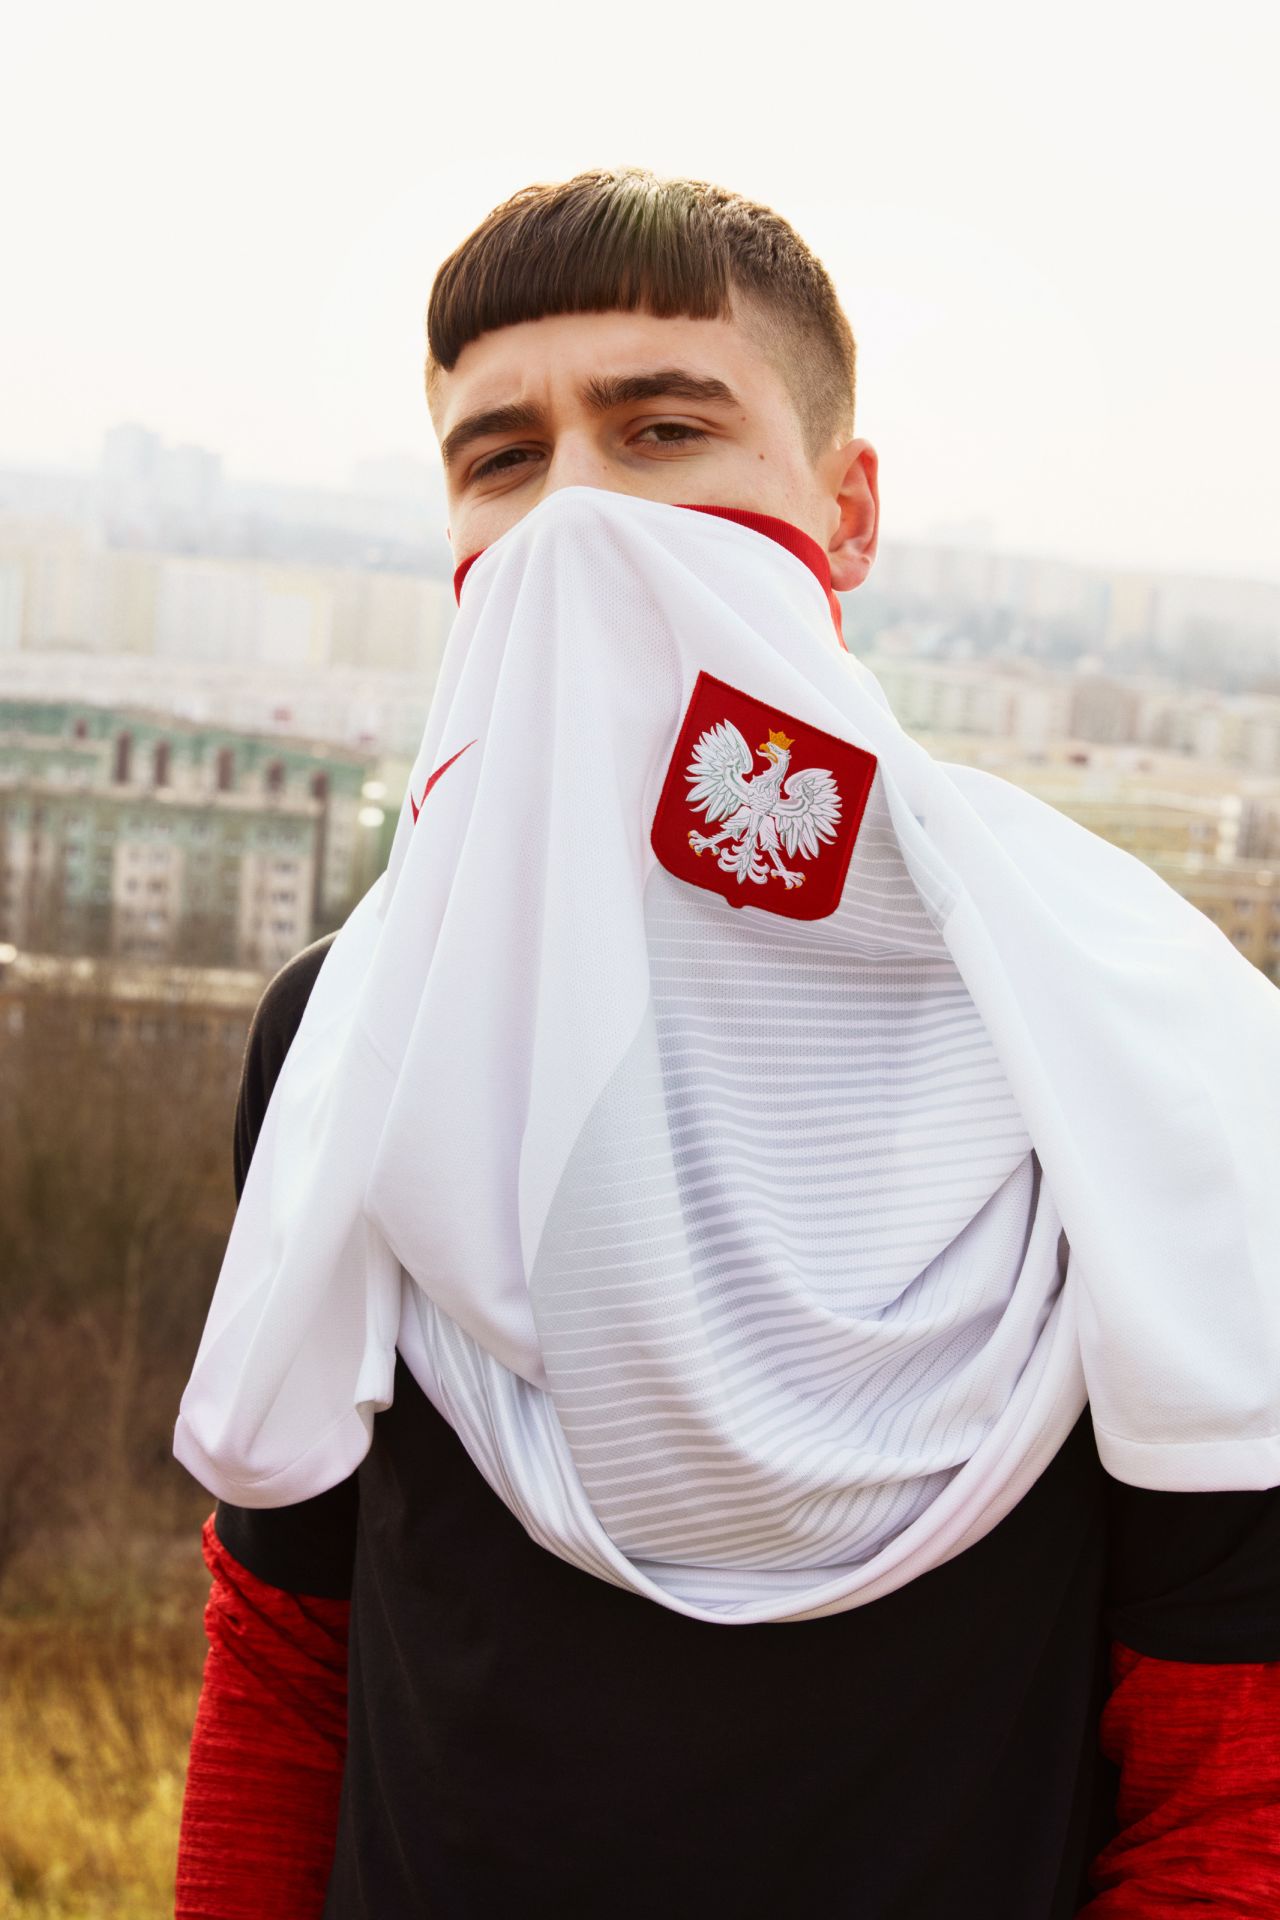 A campaign image showing Nike's 2018 kit for the Polish football team. Today, kits are often launched stylish photos that wouldn't seem out of place in a fashion magazine.